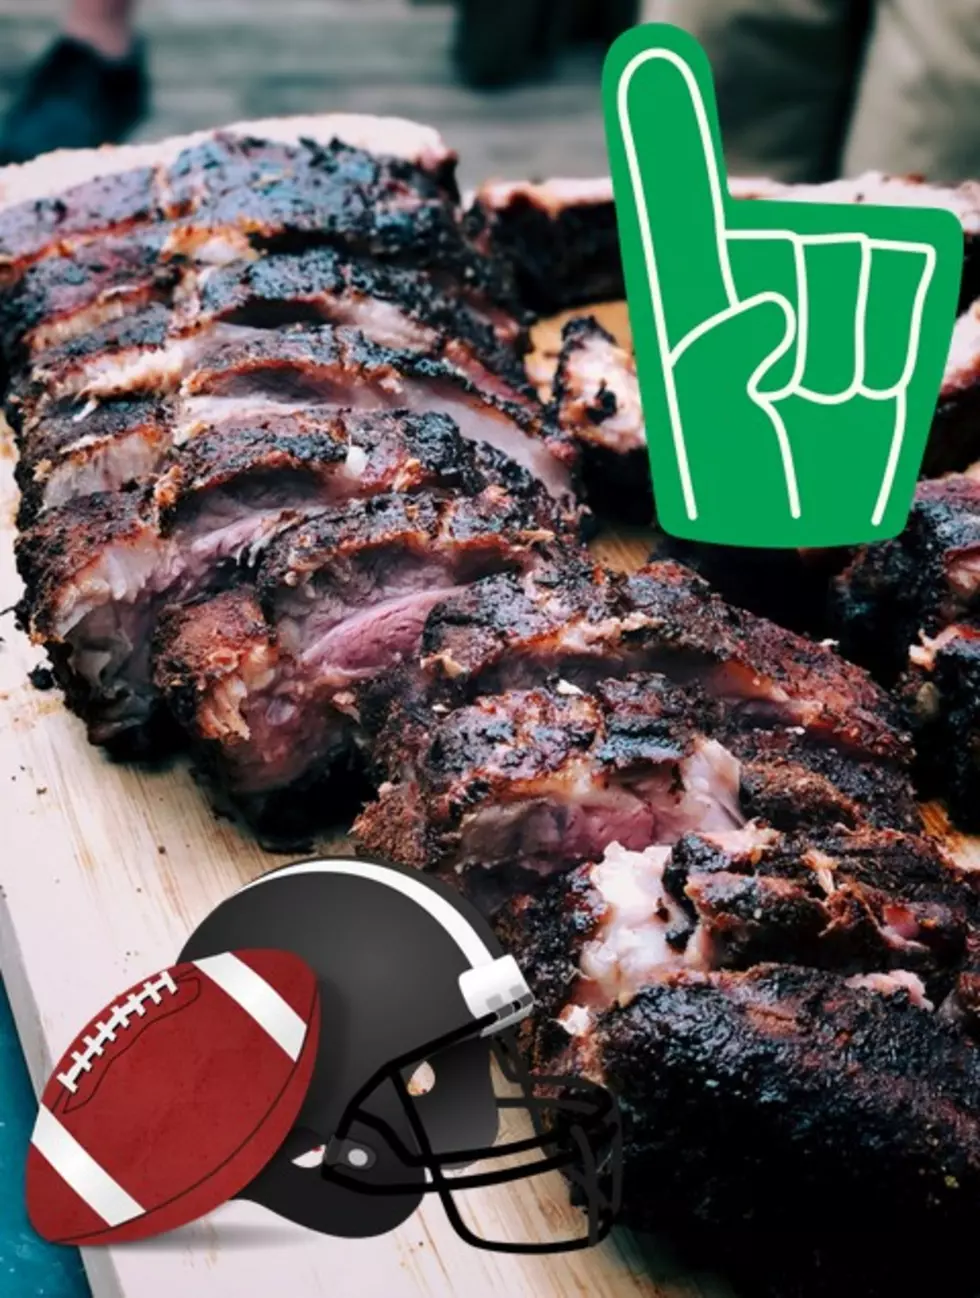 The Best BBQ in Every Texas College Football Town